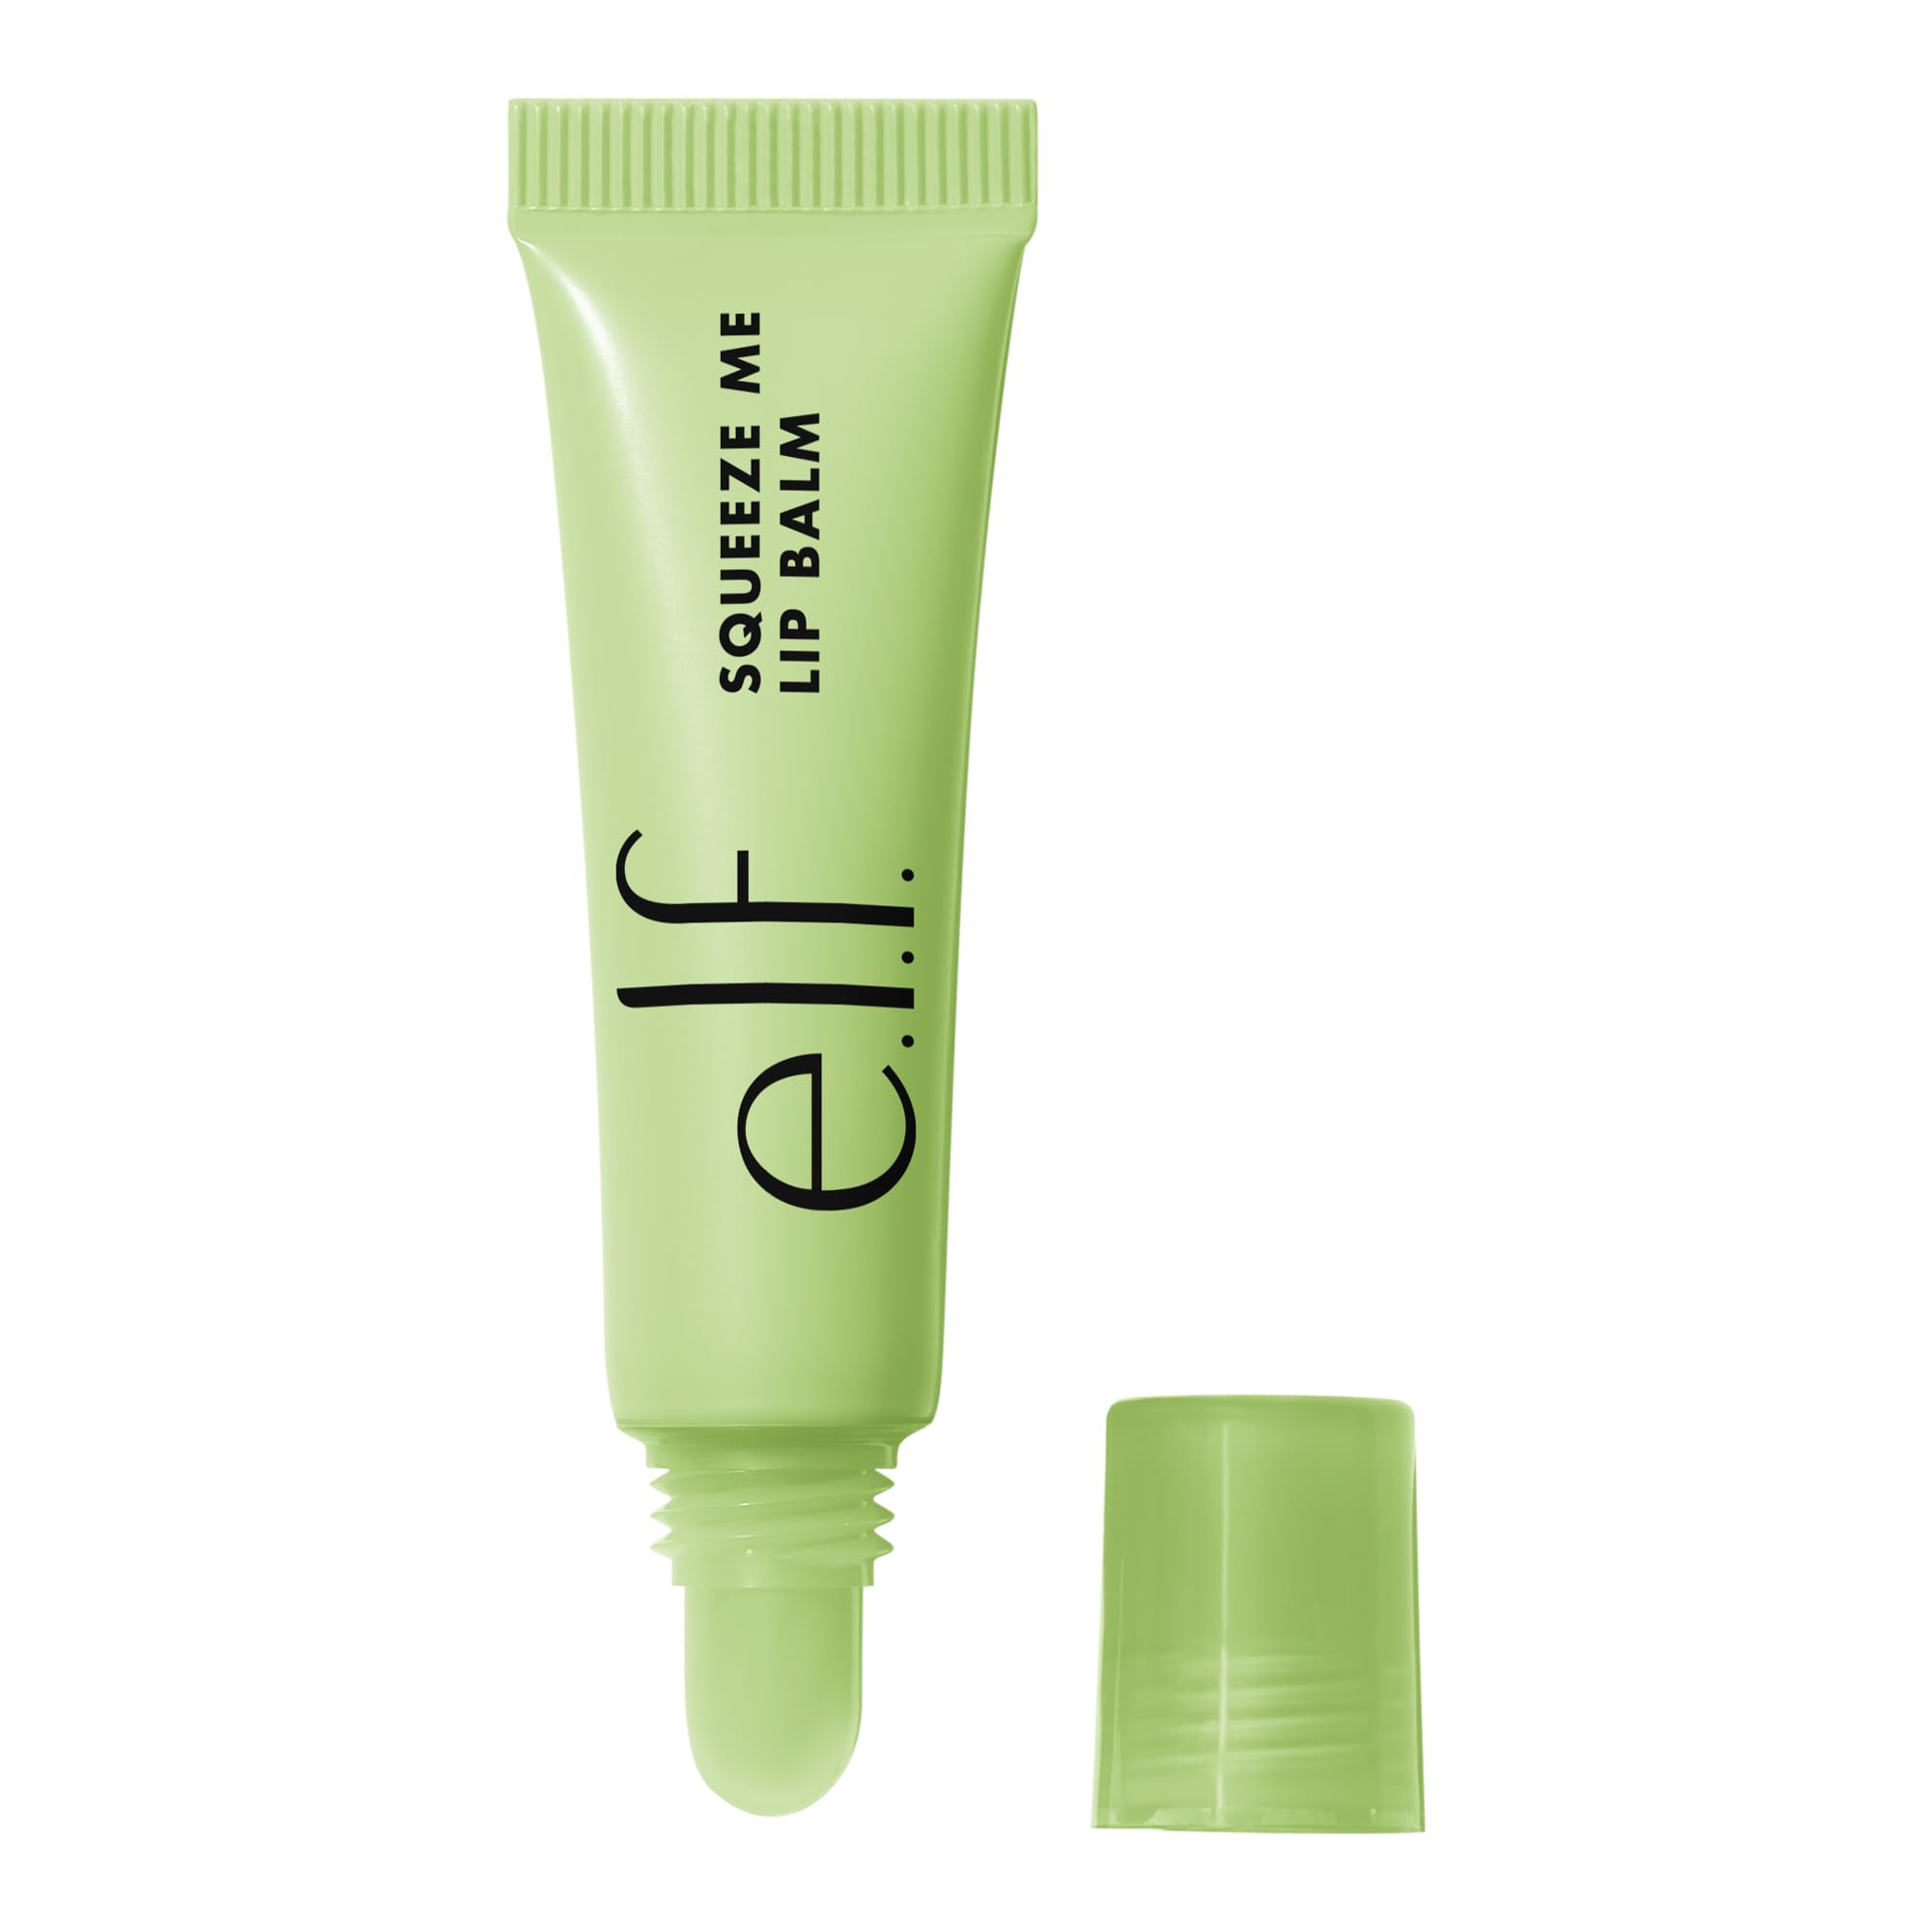 e.l.f. Squeeze Me Lip Balm, Moisturizing Lip Balm For A Sheer Tint Of Color, Infused With Hyaluronic Acid, Vegan & Cruelty-free, Honeydew